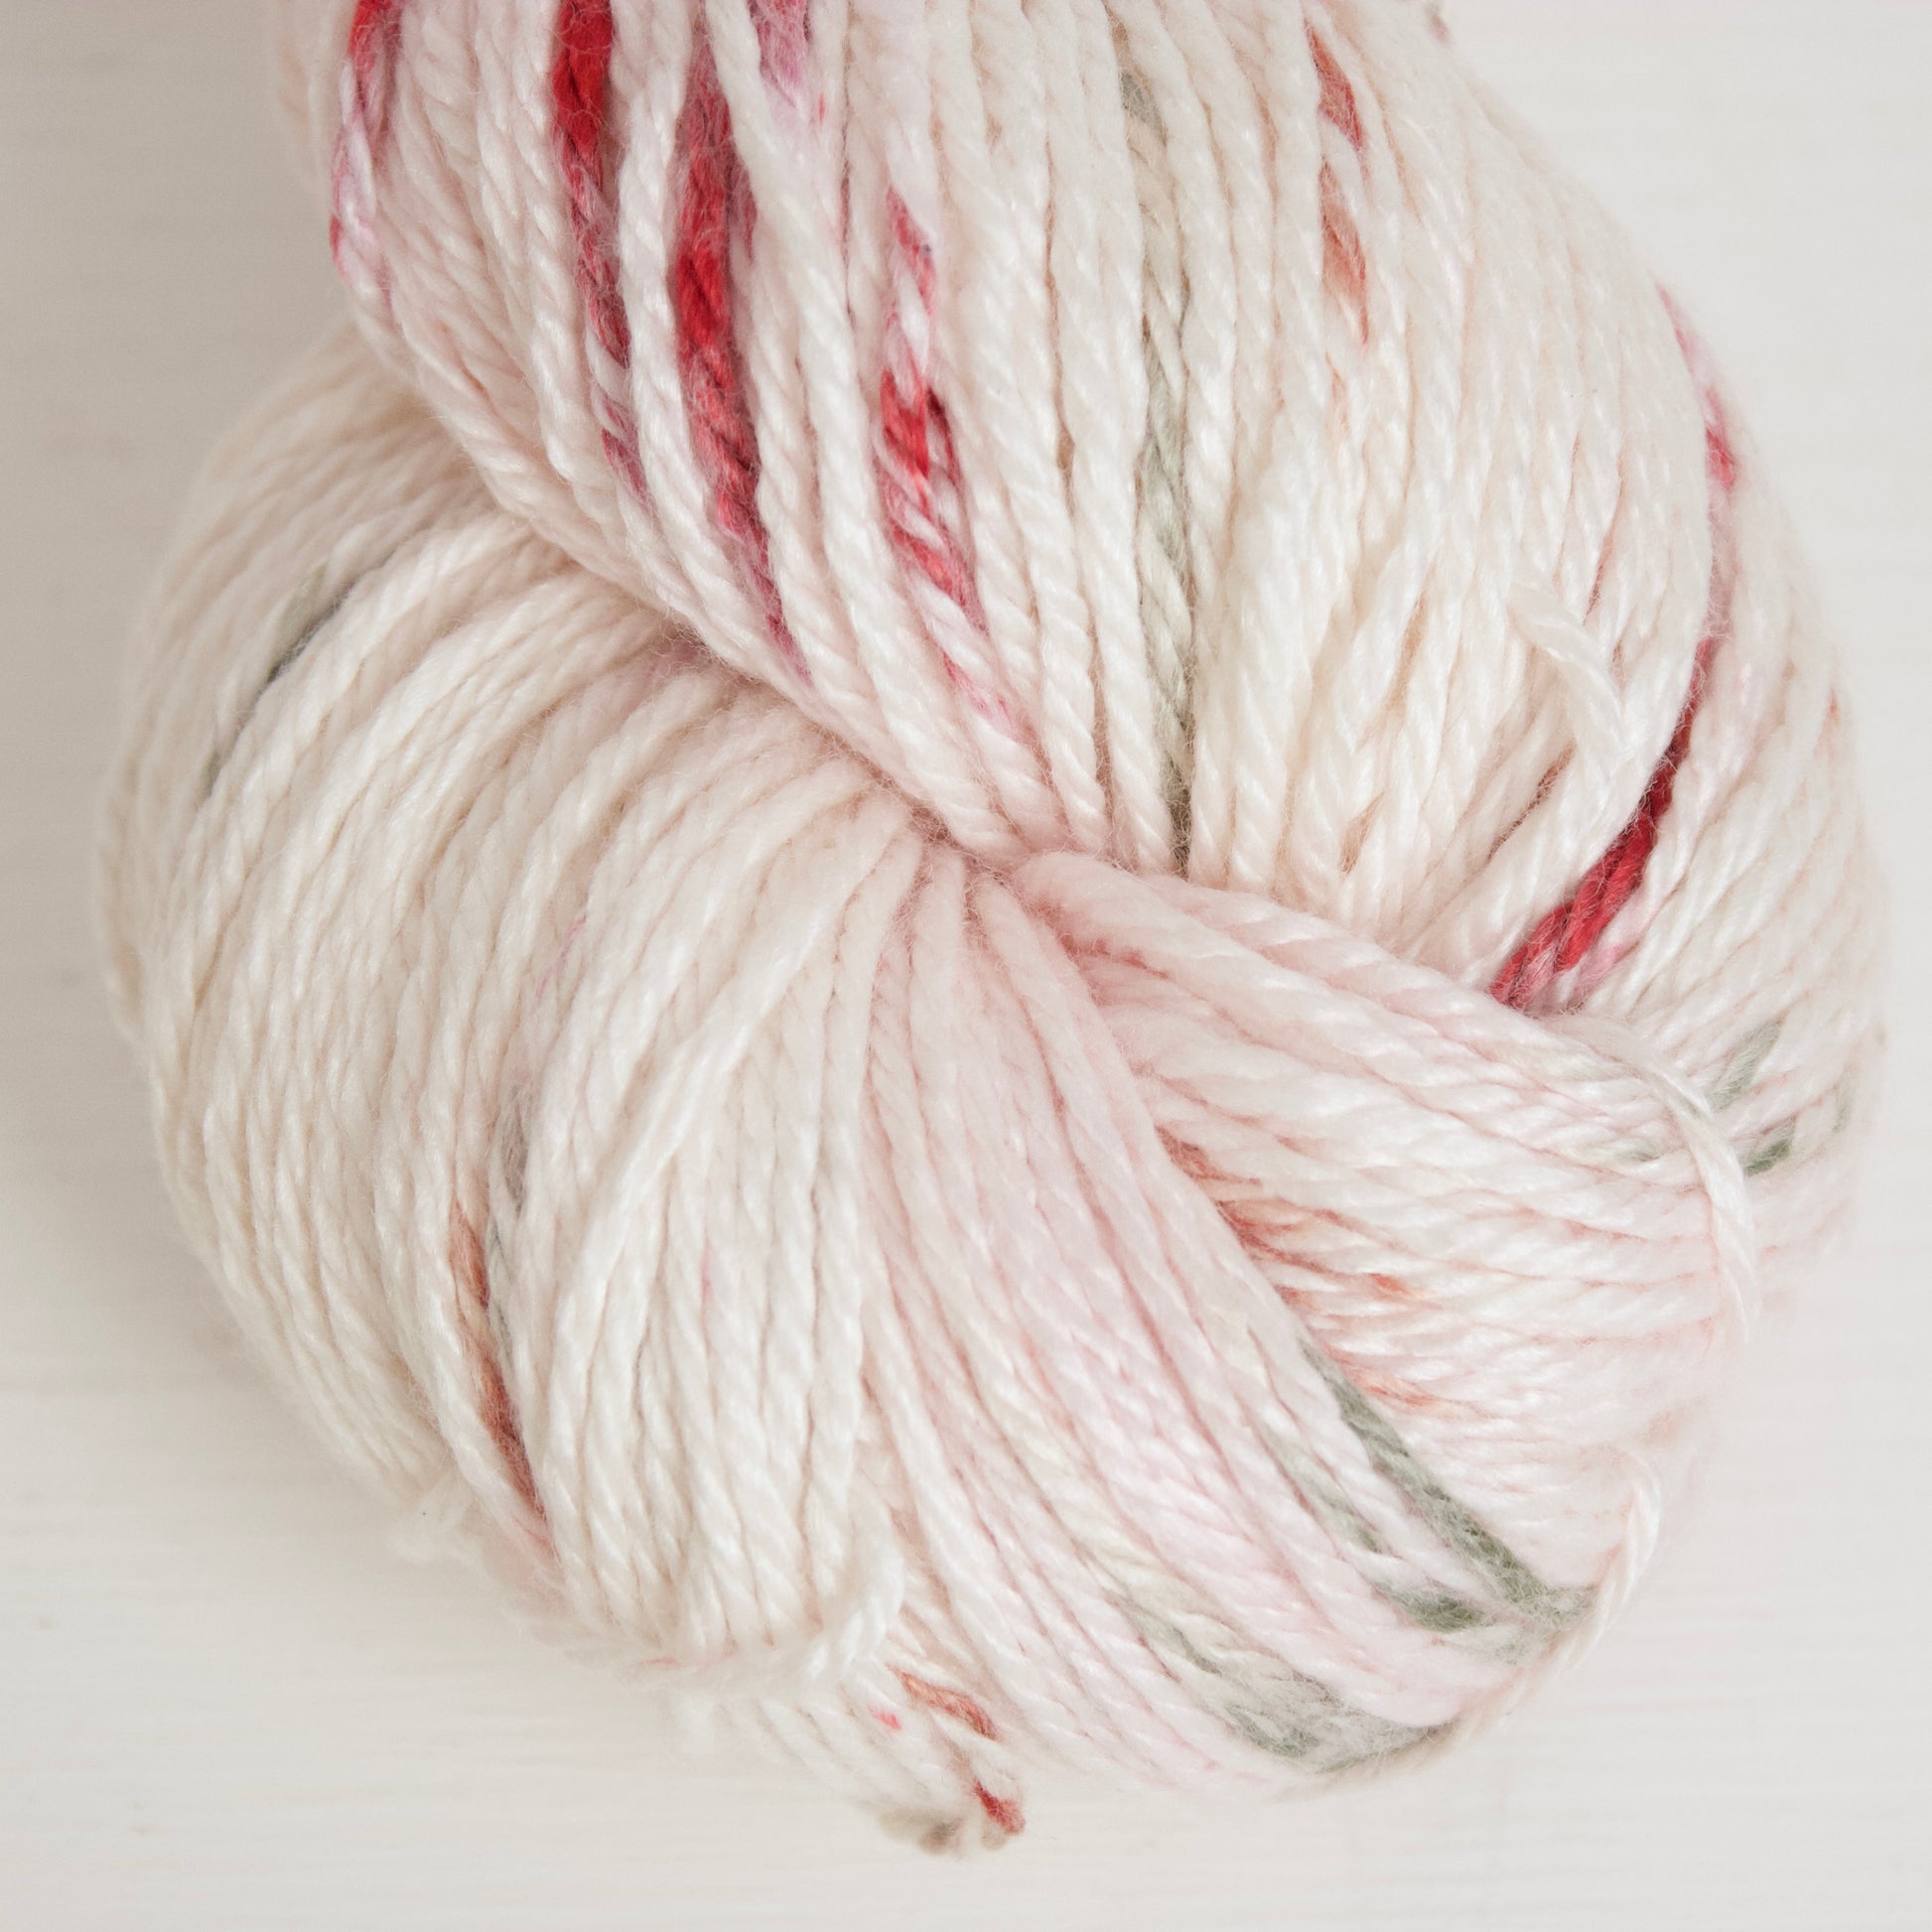 Cinnamon Sage Rose on Alnilam is a creamy white base with tints of light pink and dashes of red-brown, and burgundy with purple halos, and strikes of sage green.